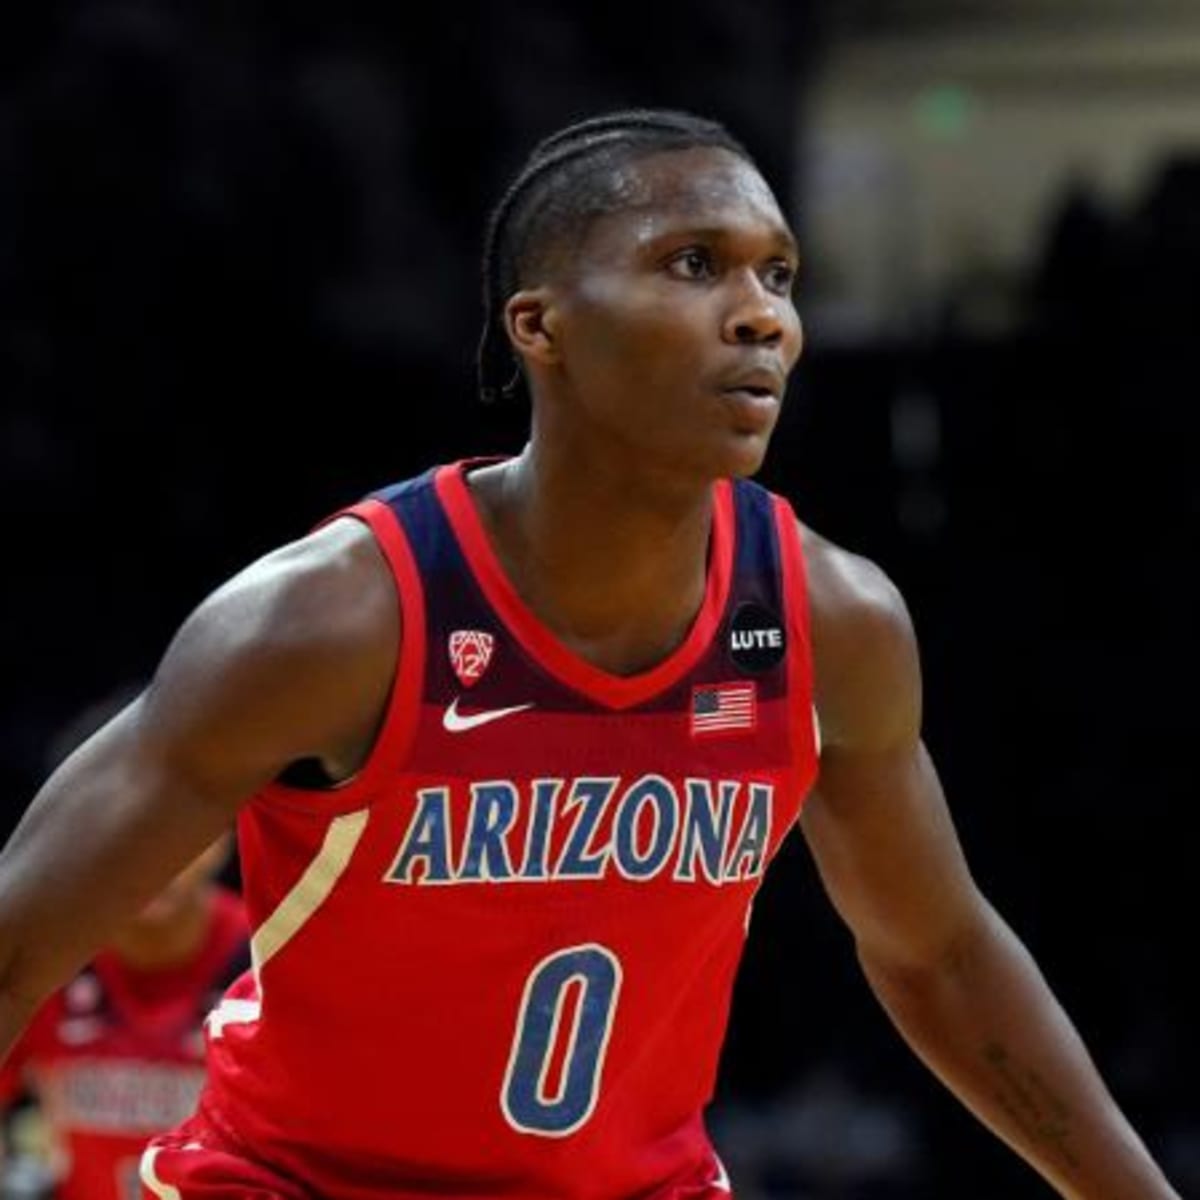 Arizona's Mathurin named Pac-12 player of the year